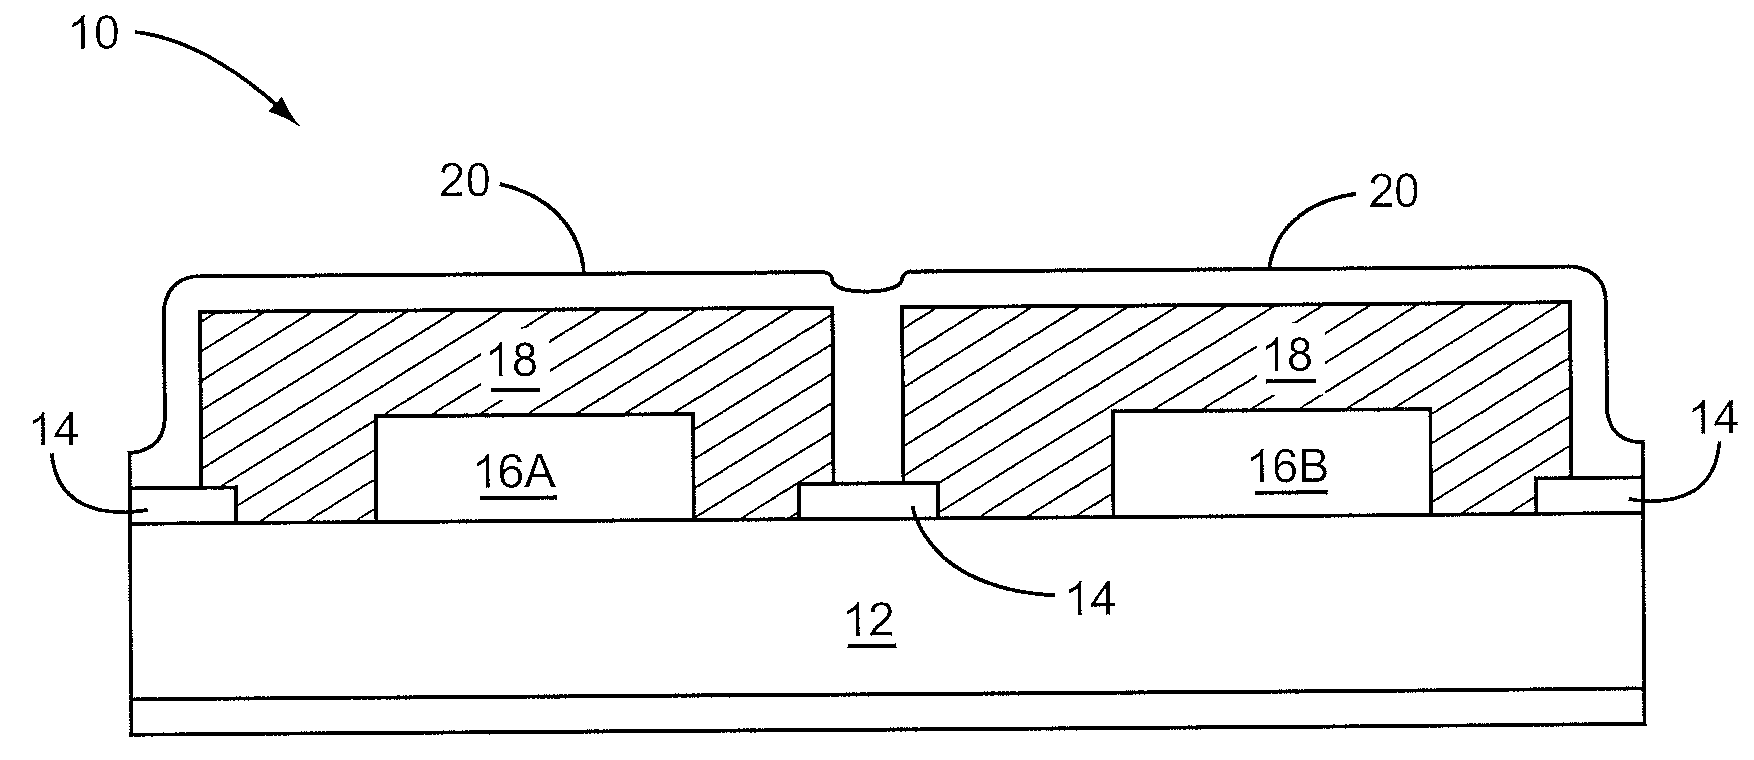 Bottom side support structure for conformal shielding process